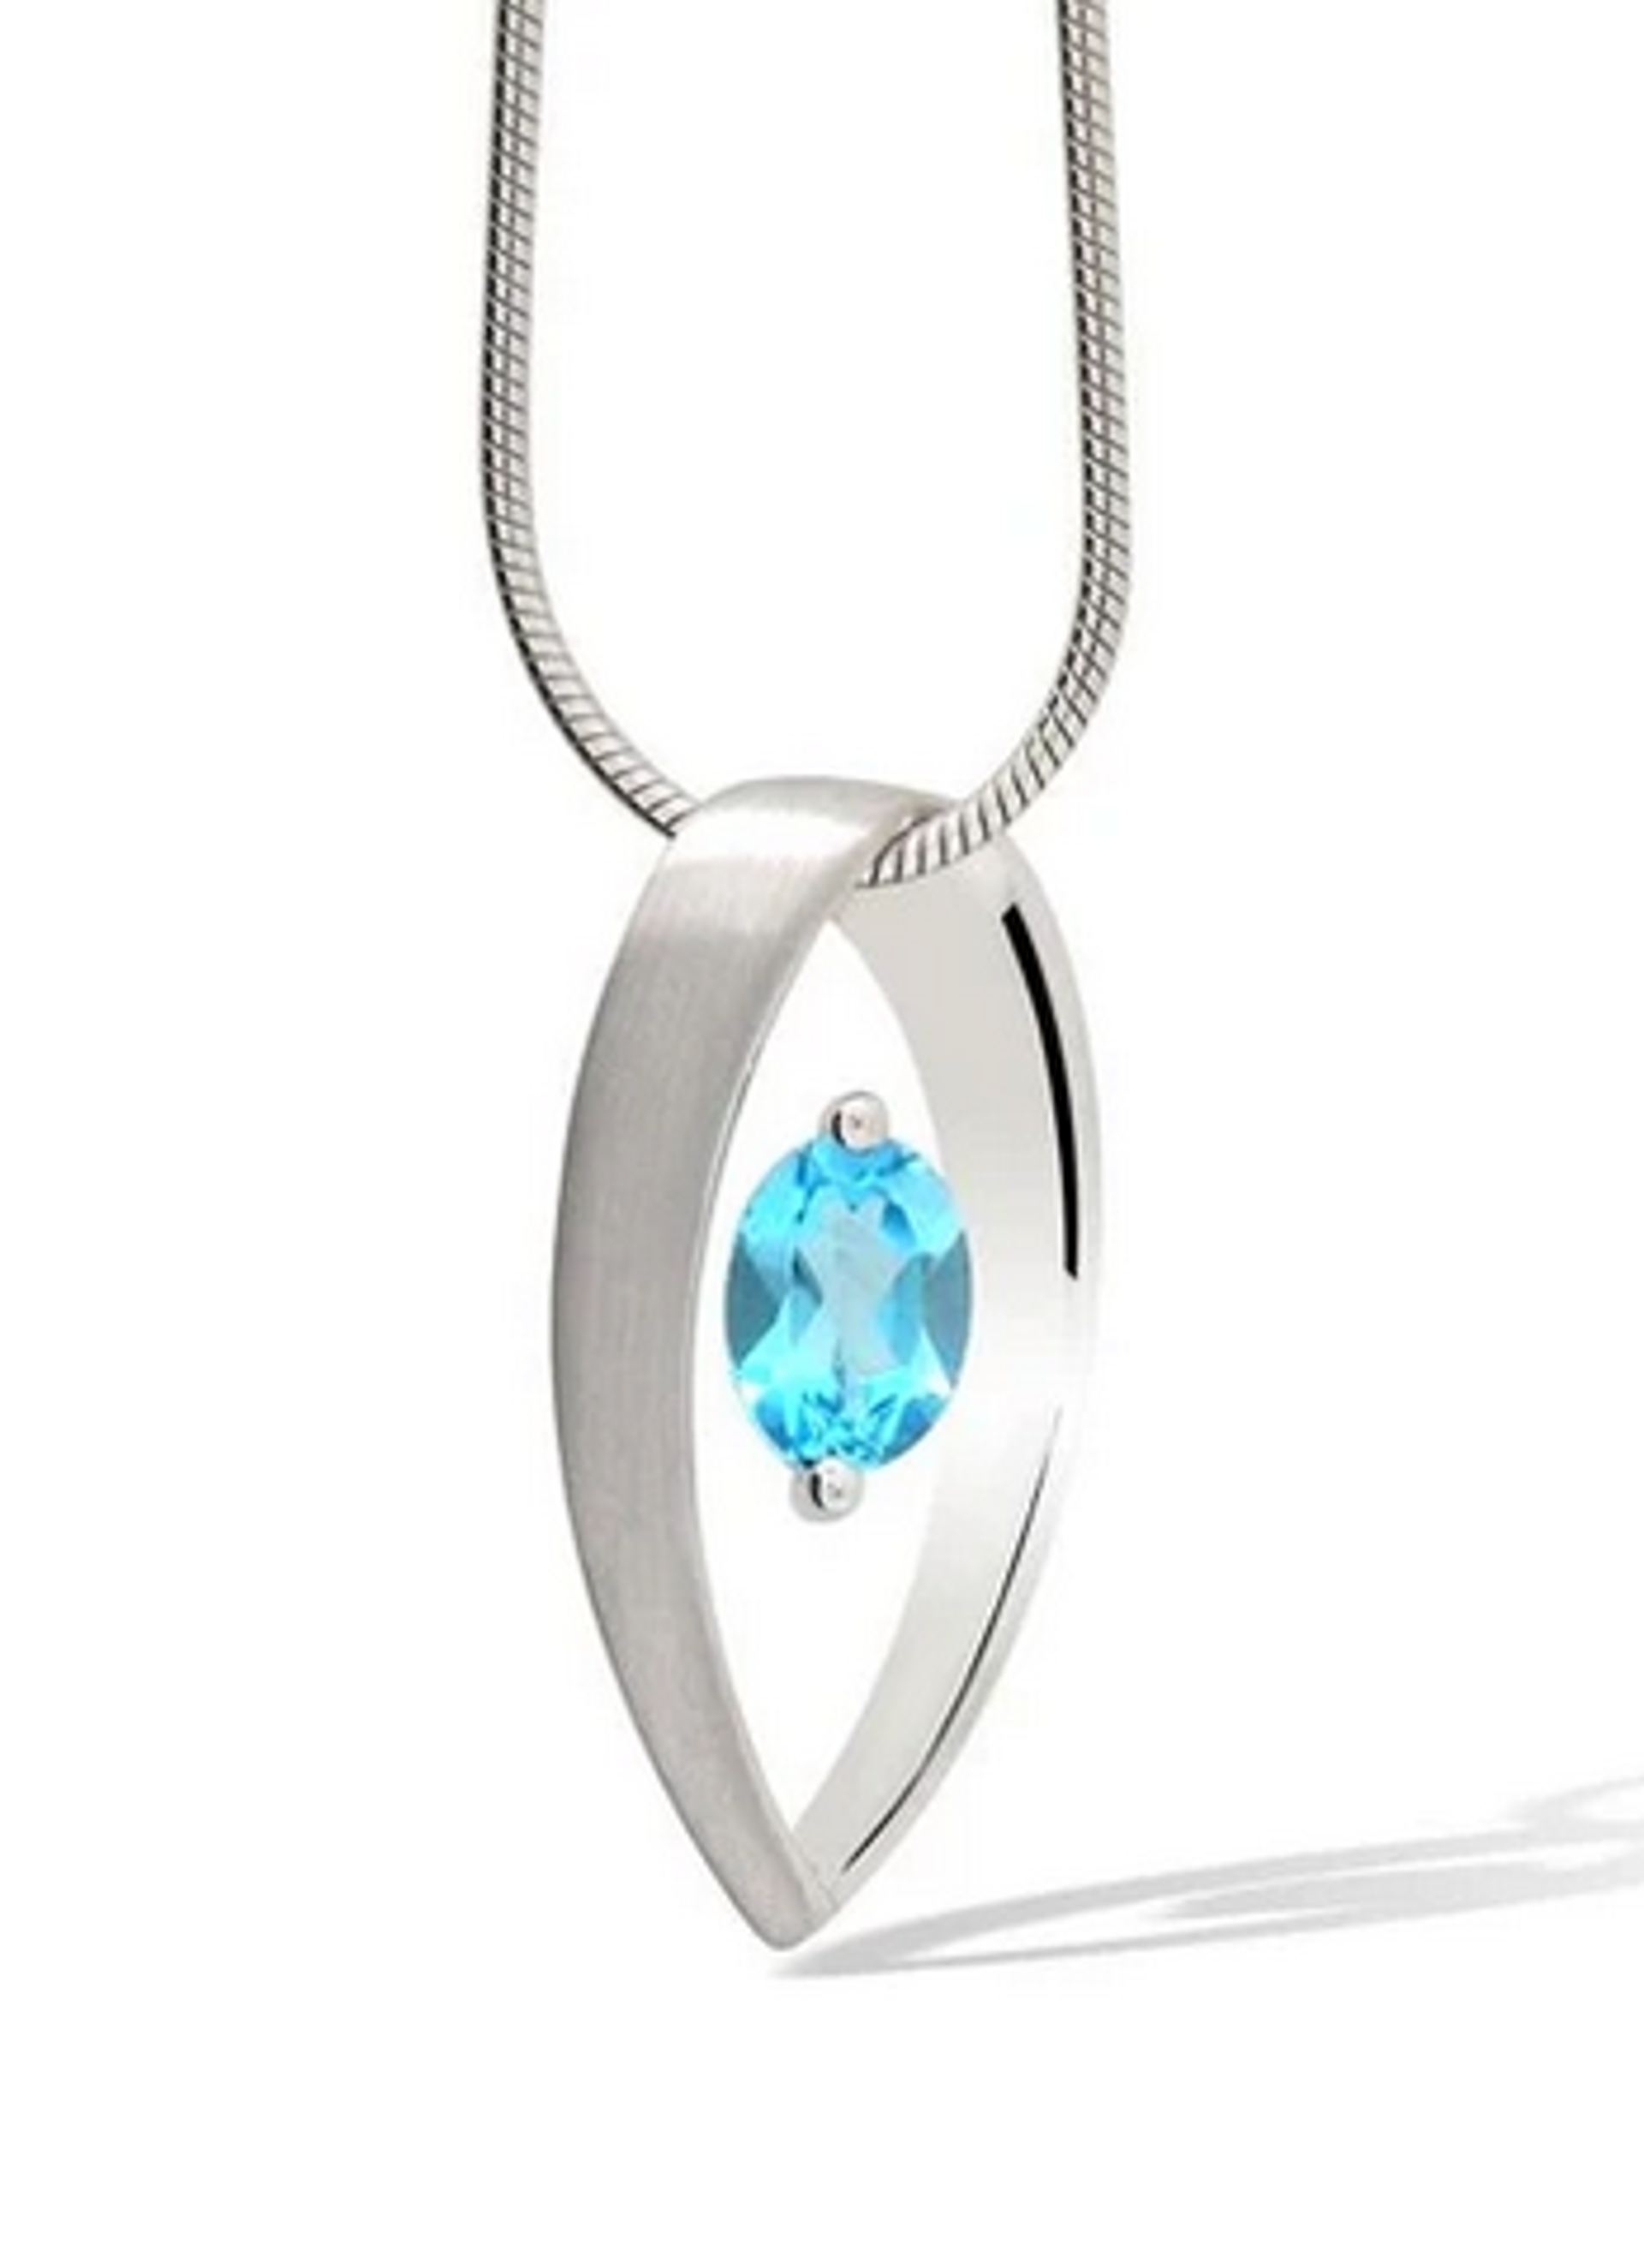 Pendant - Blue Topaz With Polished Sterling Silver  P7320BT by Joryel Vera